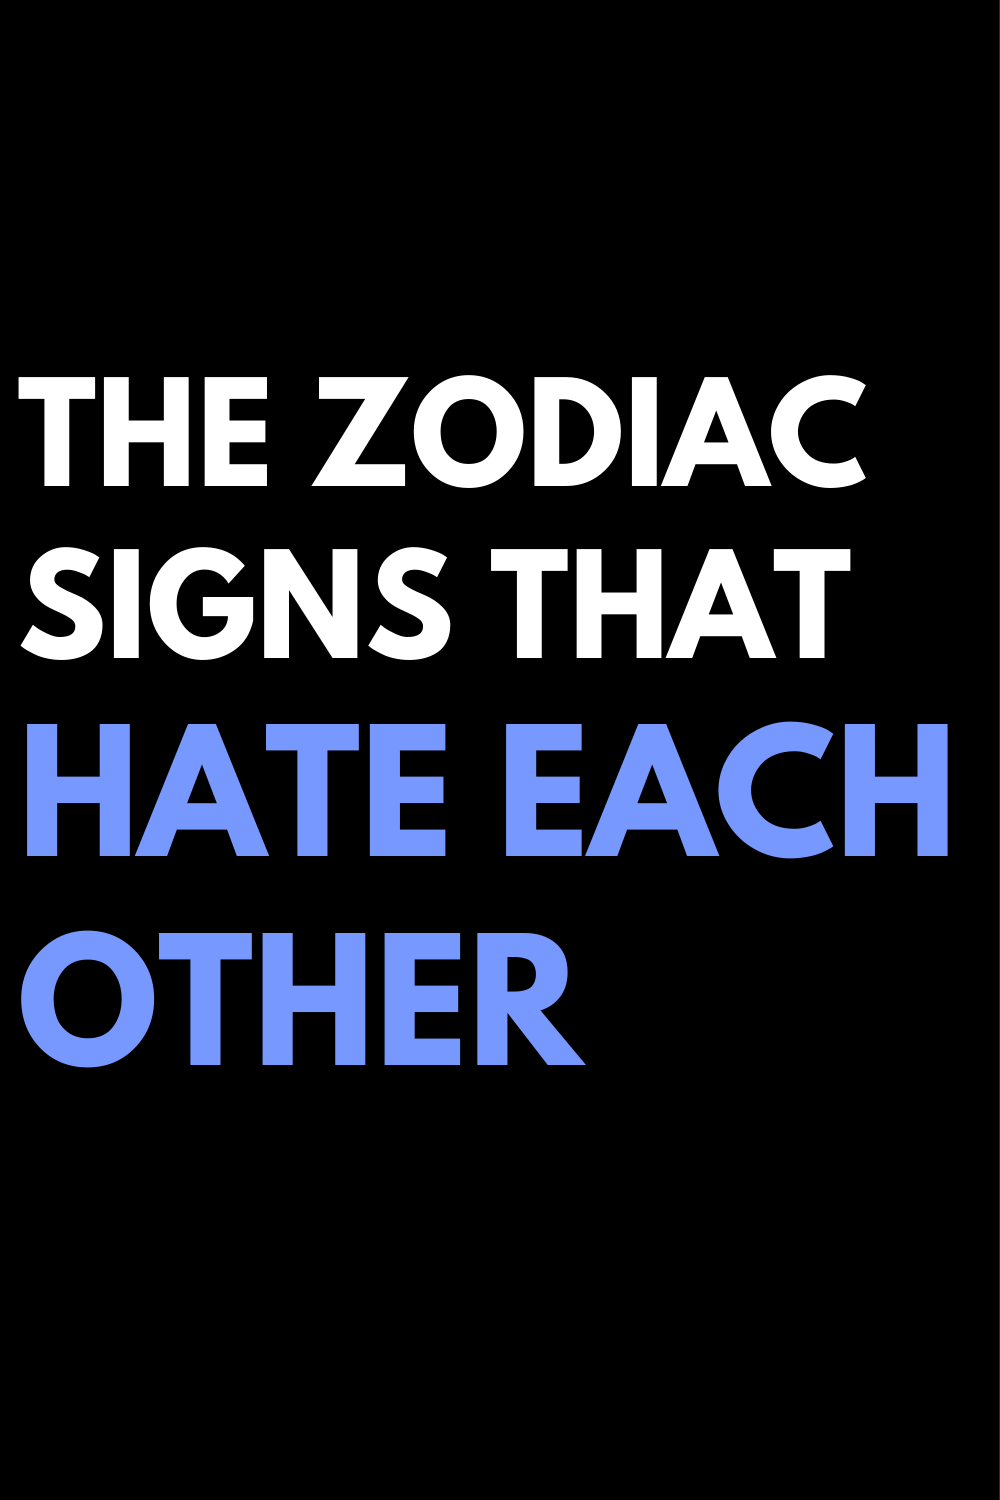 The zodiac signs that hate each other